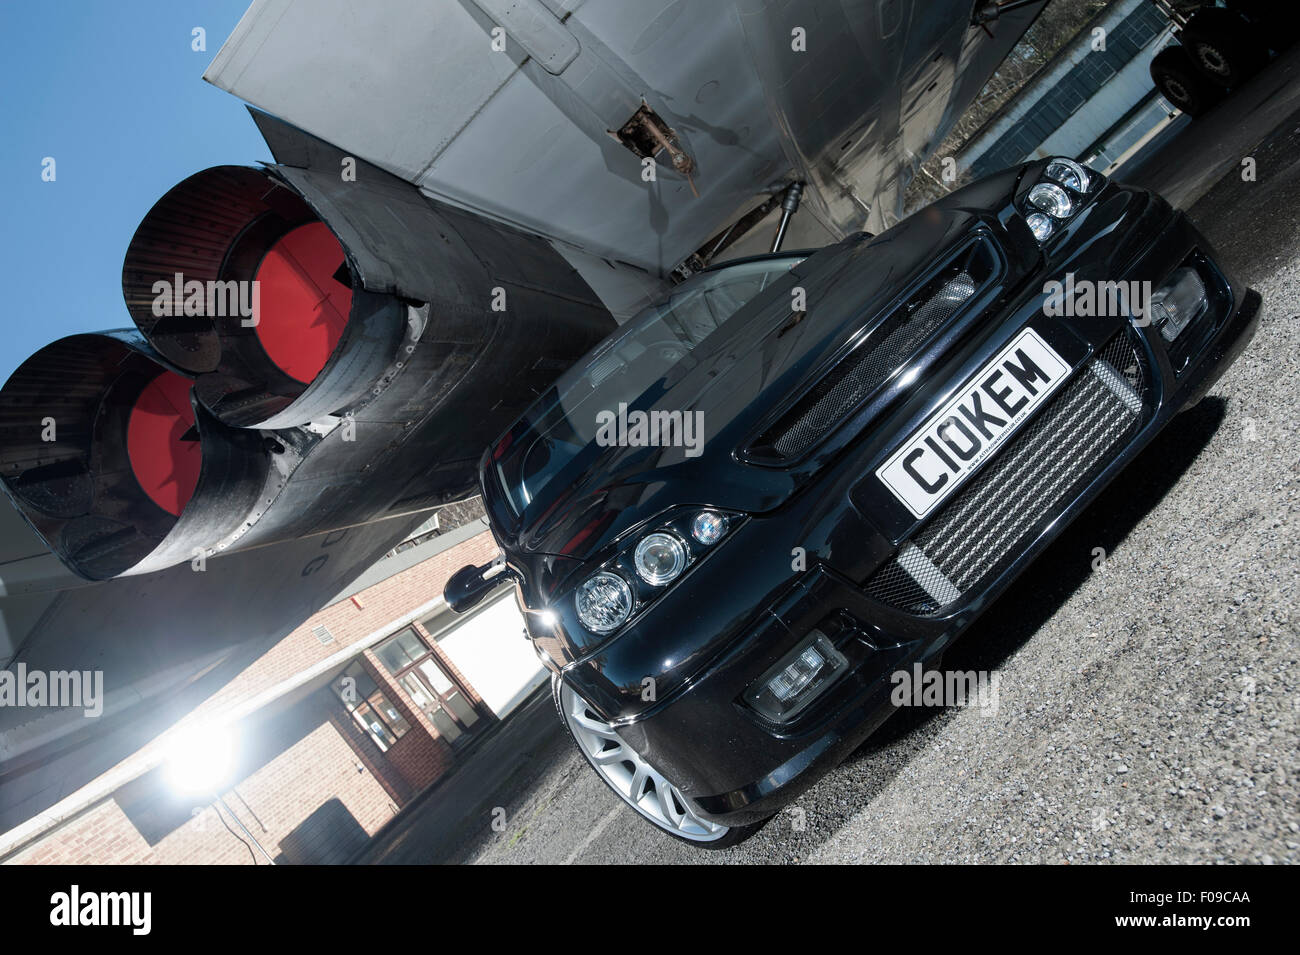 Modified Mk3 Vauxhall Astra car parked under a Concorde airliner Stock Photo